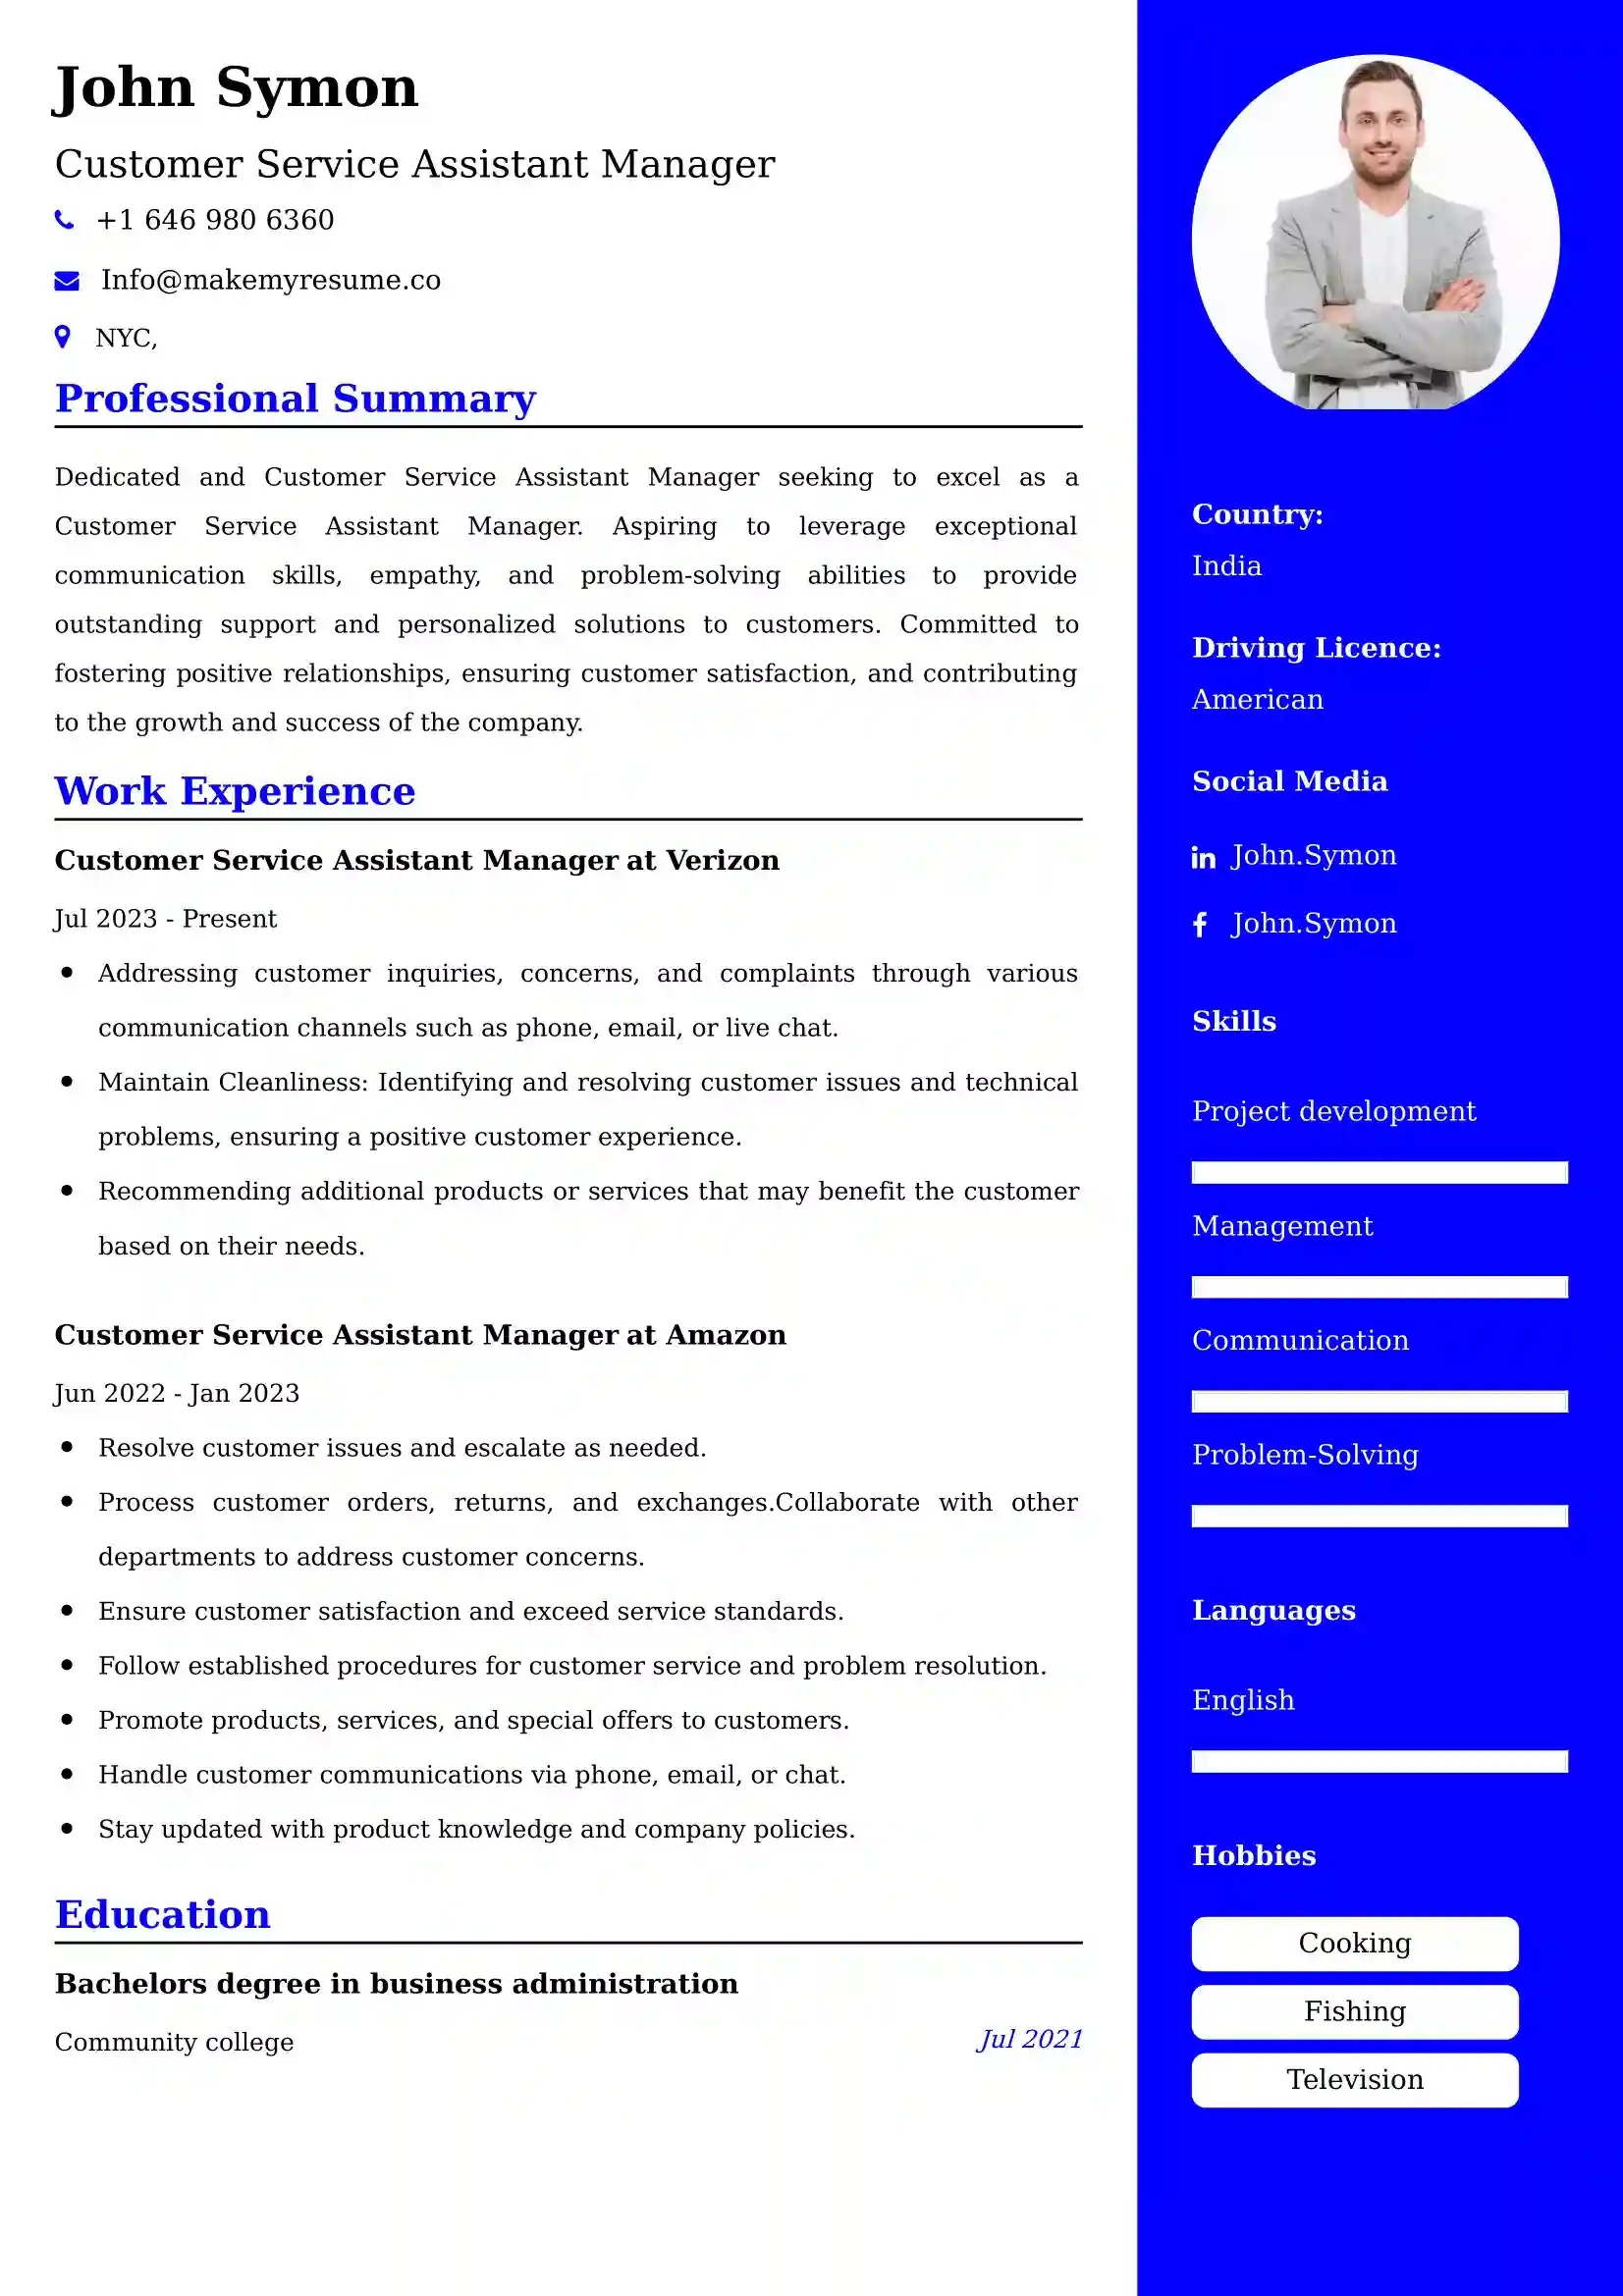 Customer Service Assistant Manager CV Examples Malaysia